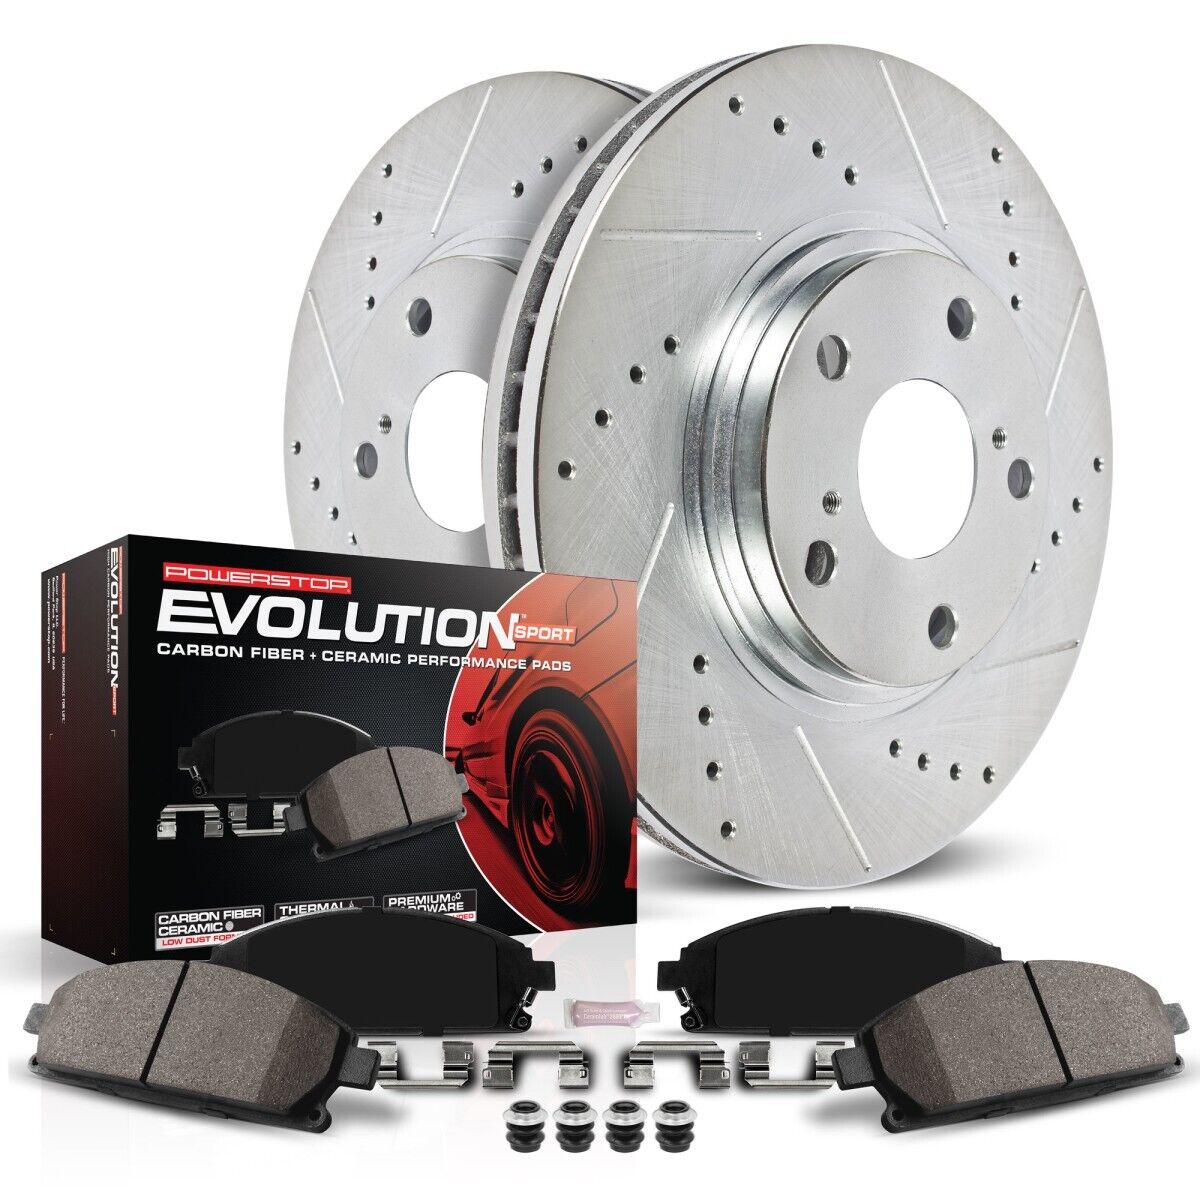 K1515 Powerstop 2-Wheel Set Brake Disc and Pad Kits Front for Saturn SL2 SL1 SC2